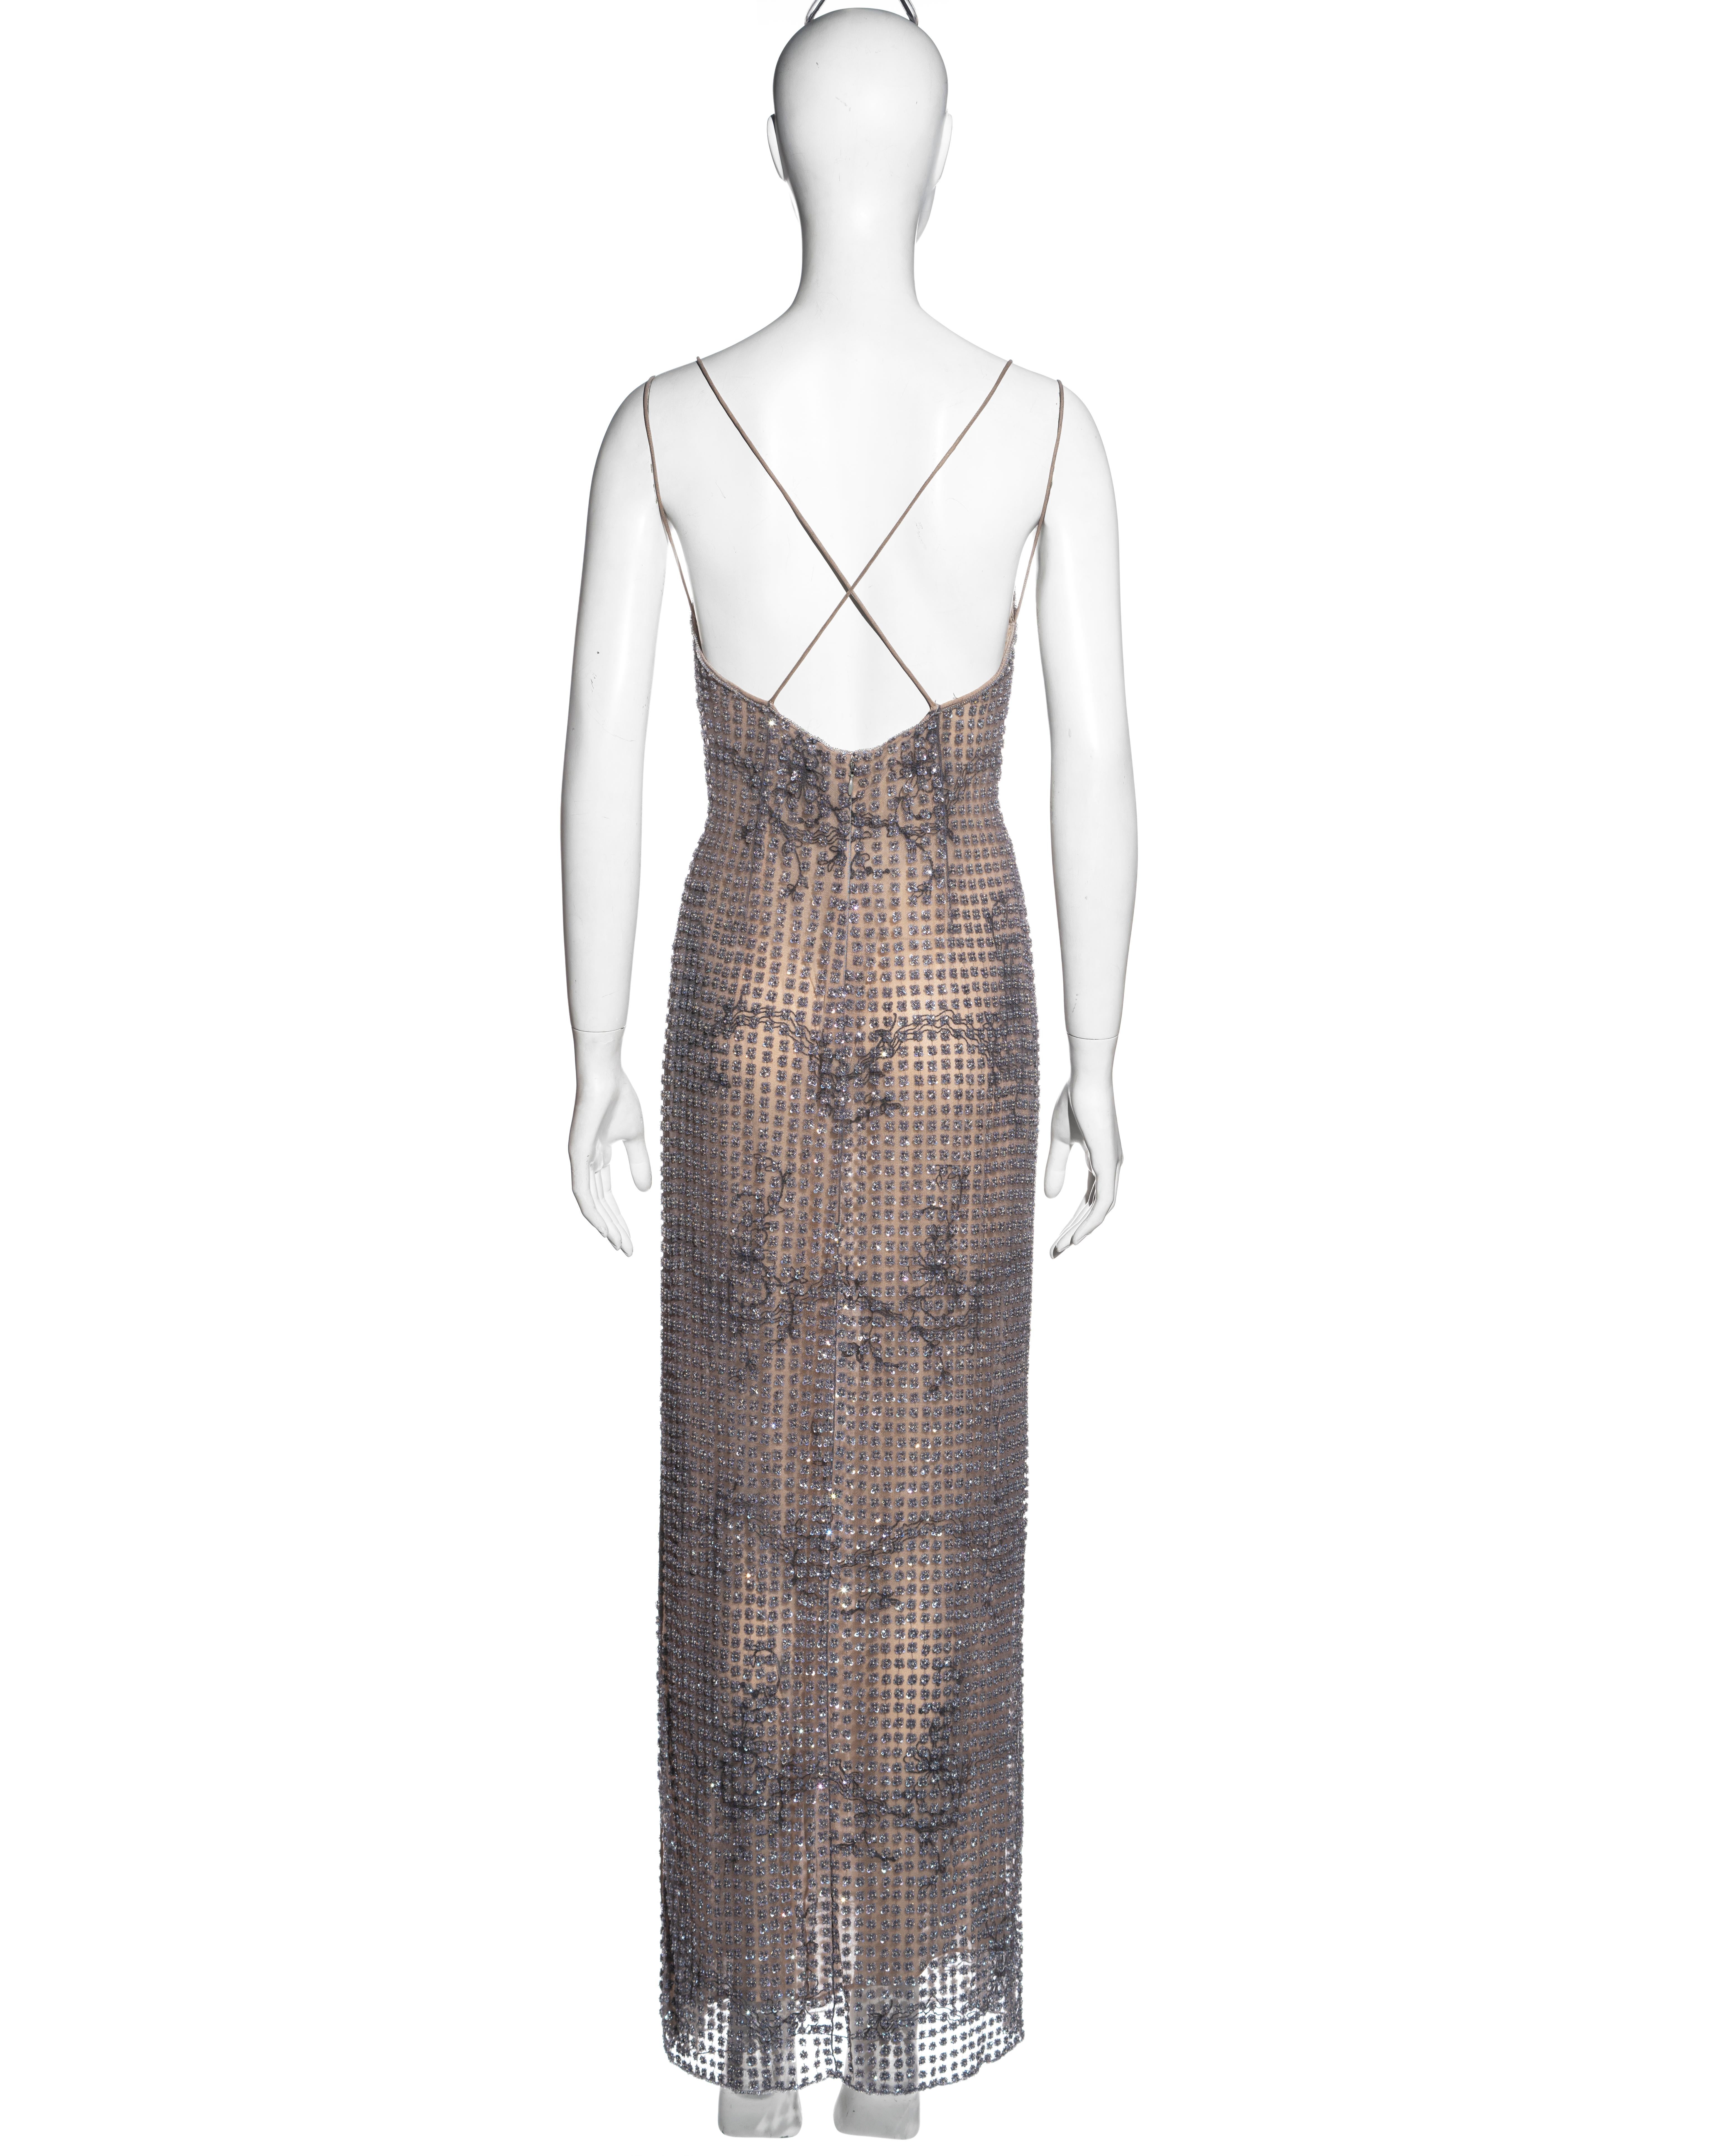 Giorgio Armani lavender beaded tulle evening dress with embroidery, ss 2000 6